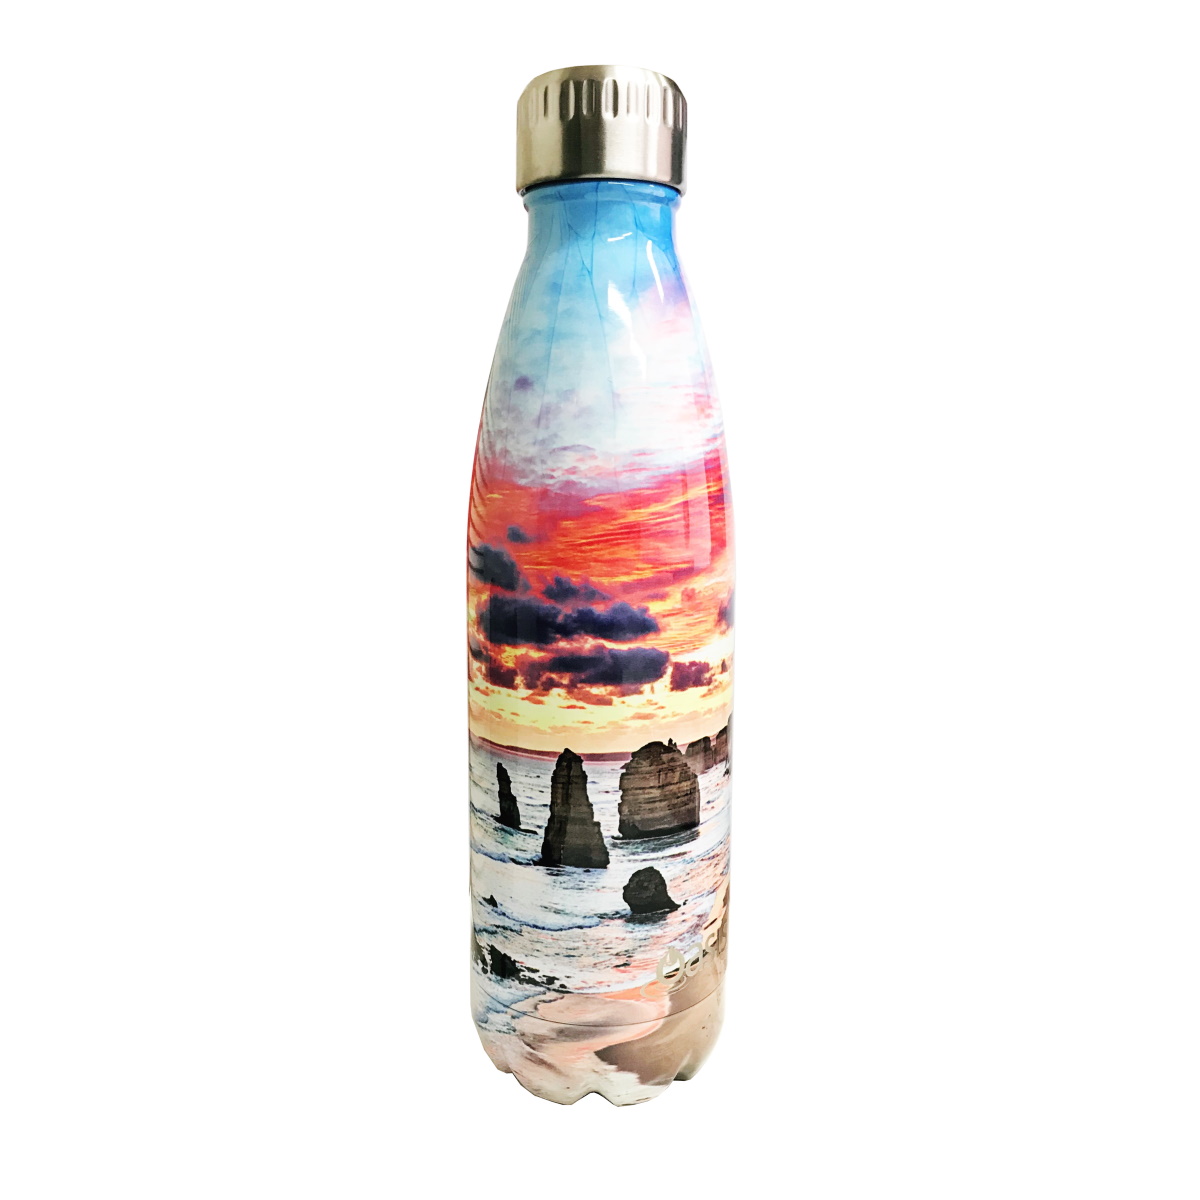 Oasis Stainless Steel Double Wall Insulated Drink Bottle 500ml - Twelve Apostles